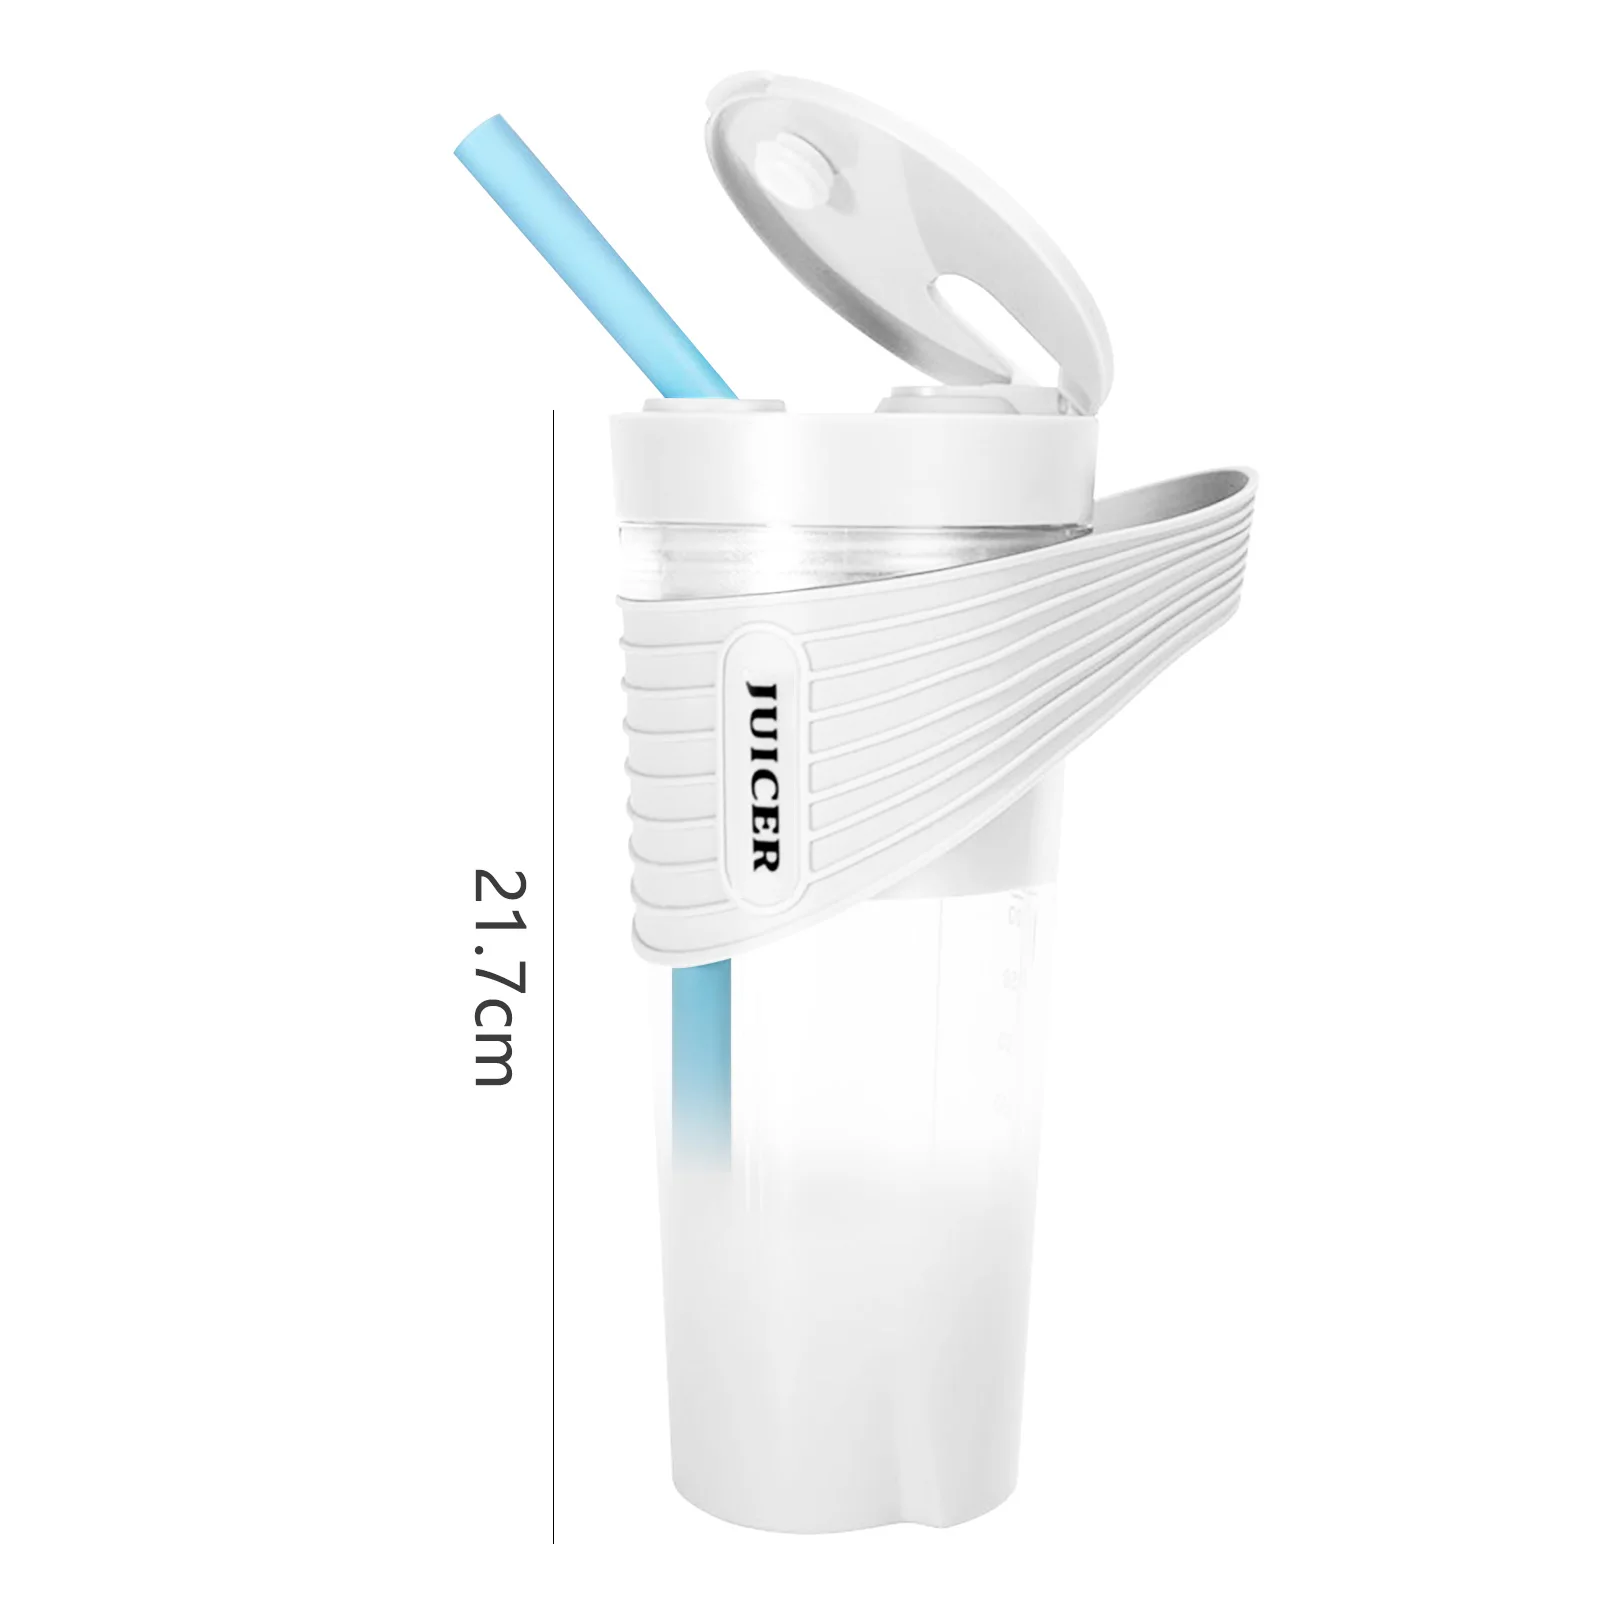 Peartso Automatic Mixing Cup Milk Stir Cup Protein Powder Electric